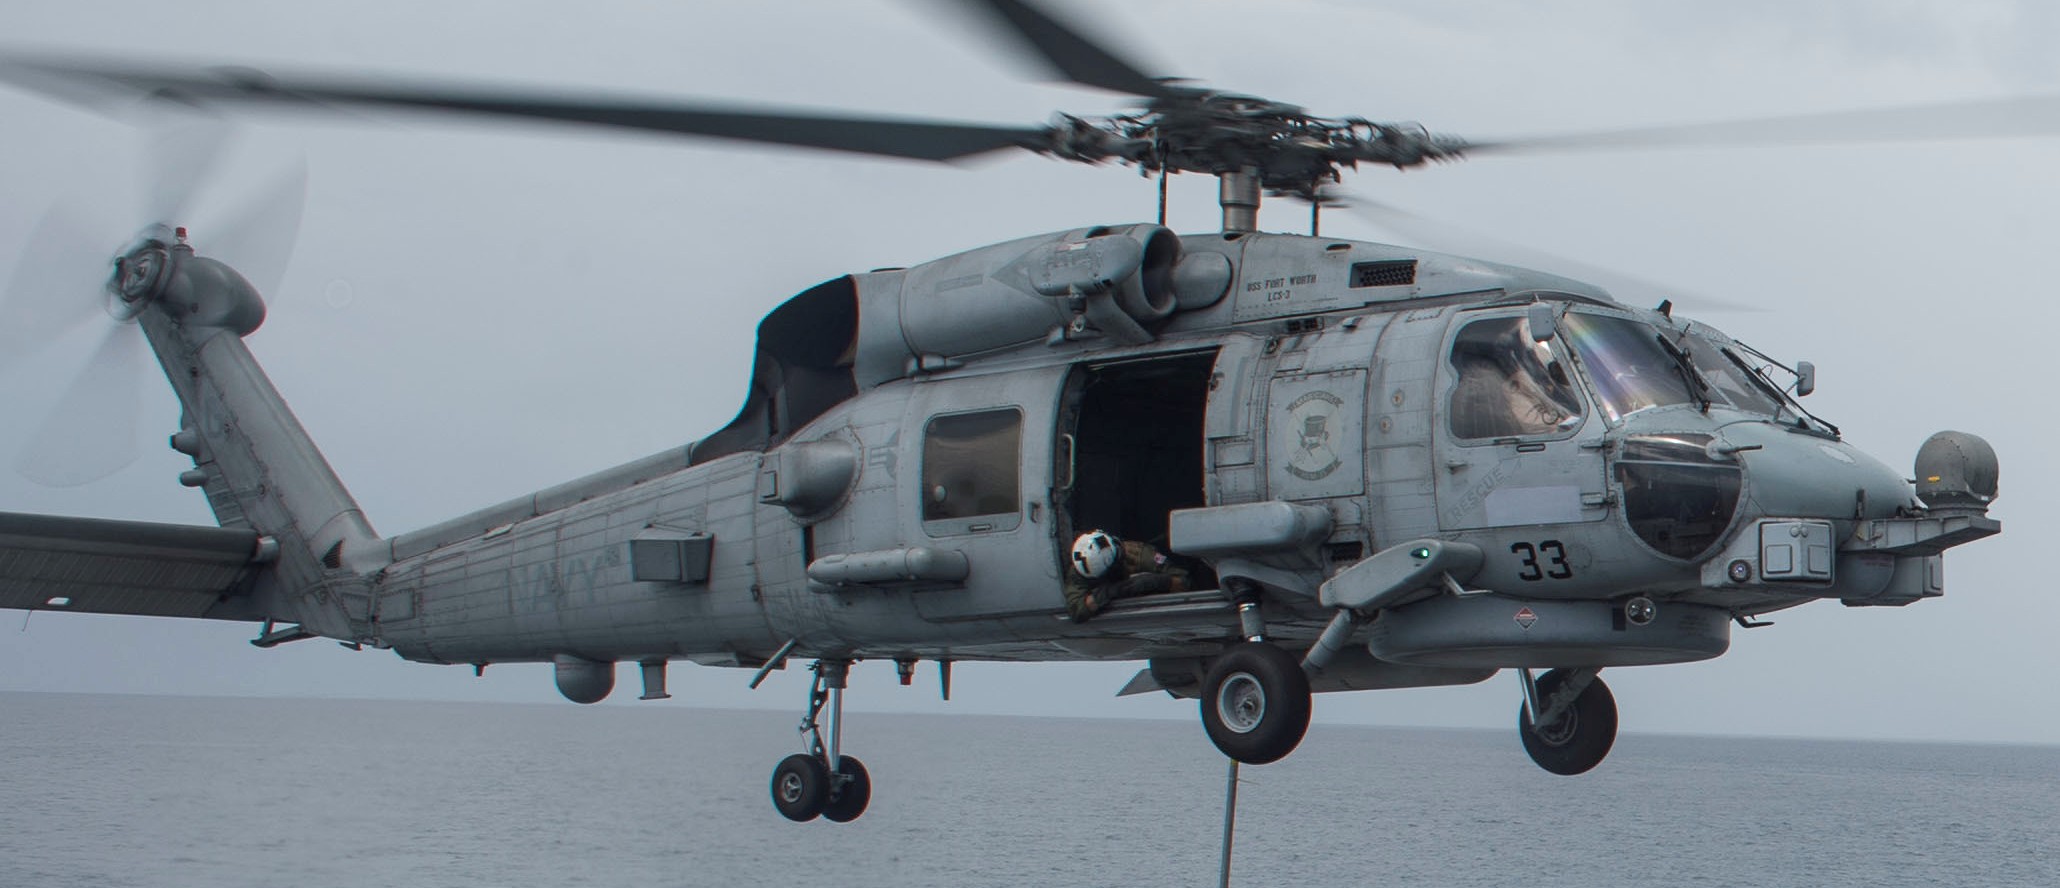 hsm-35 magicians helicopter maritime strike squadron us navy mh-60r seahawk 13